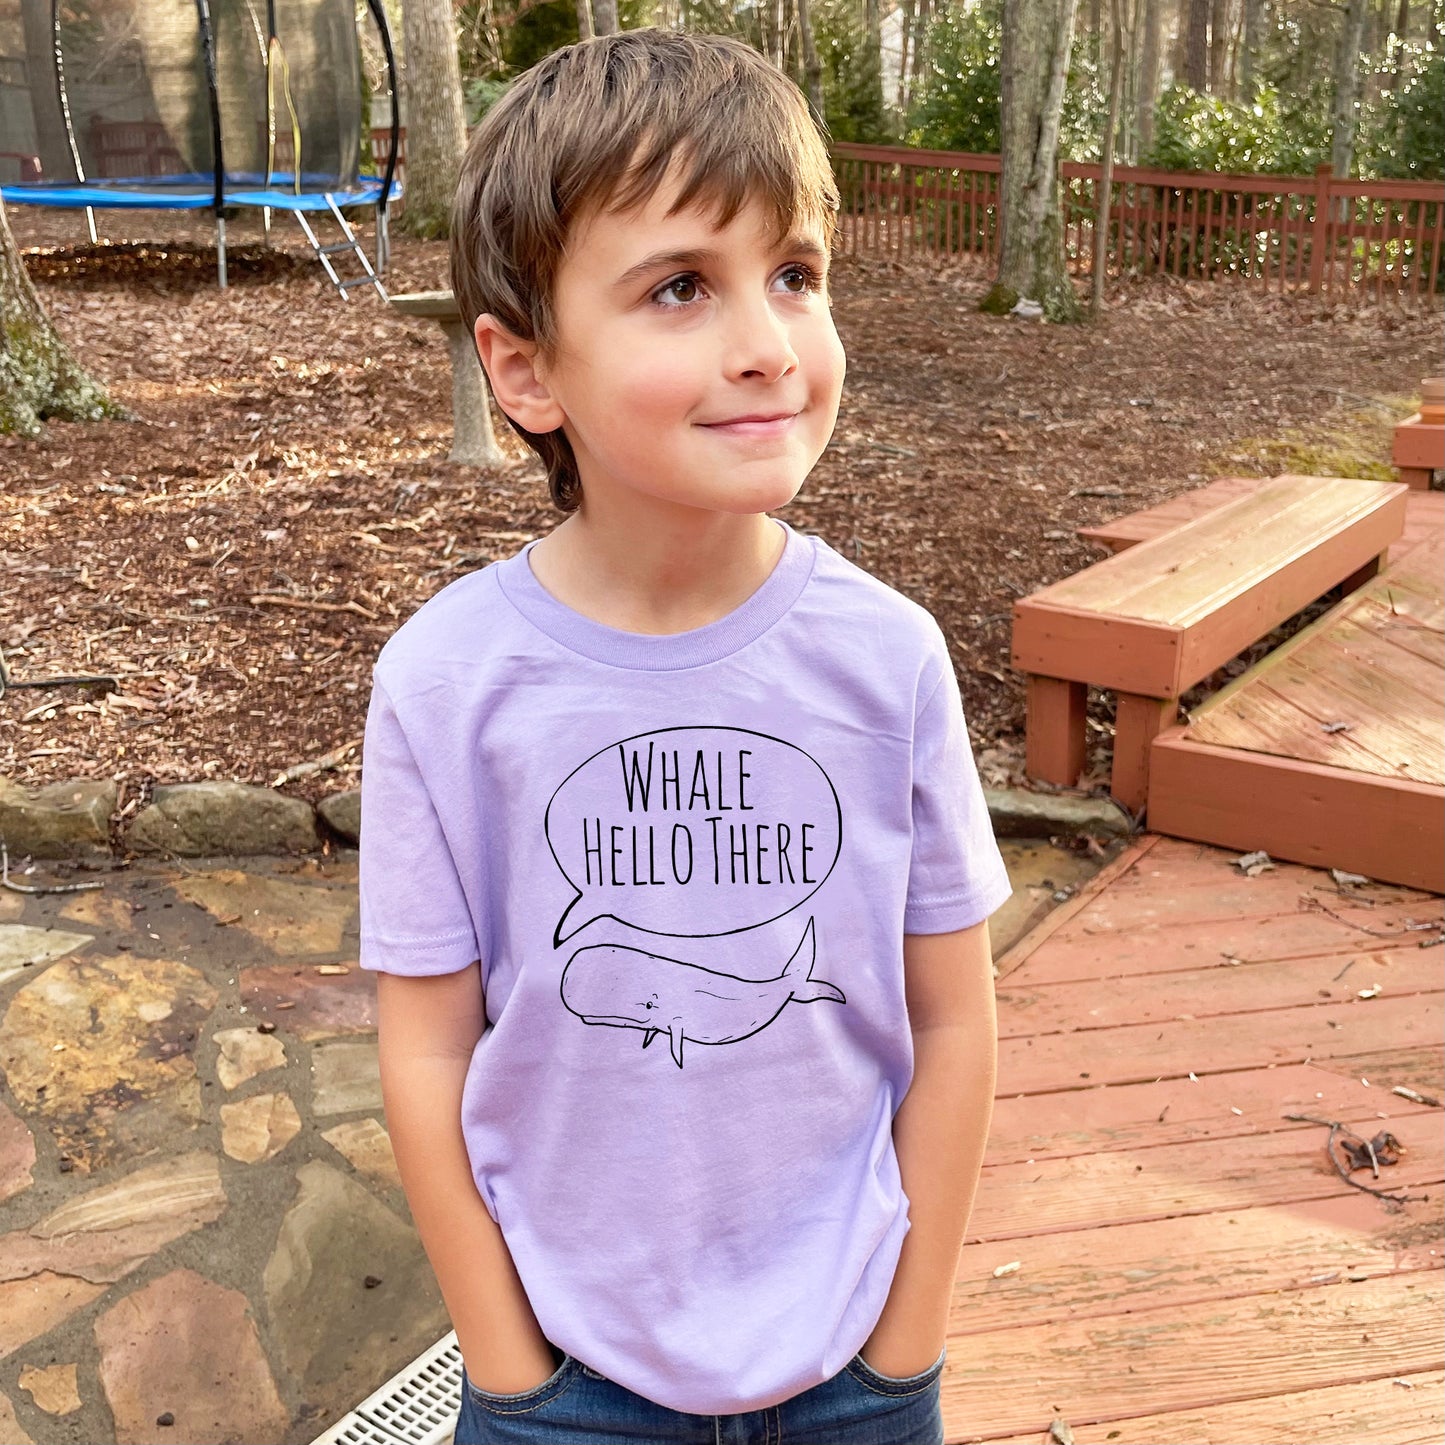 Whale Hello There - Kid's Tee - Columbia Blue or Lavender